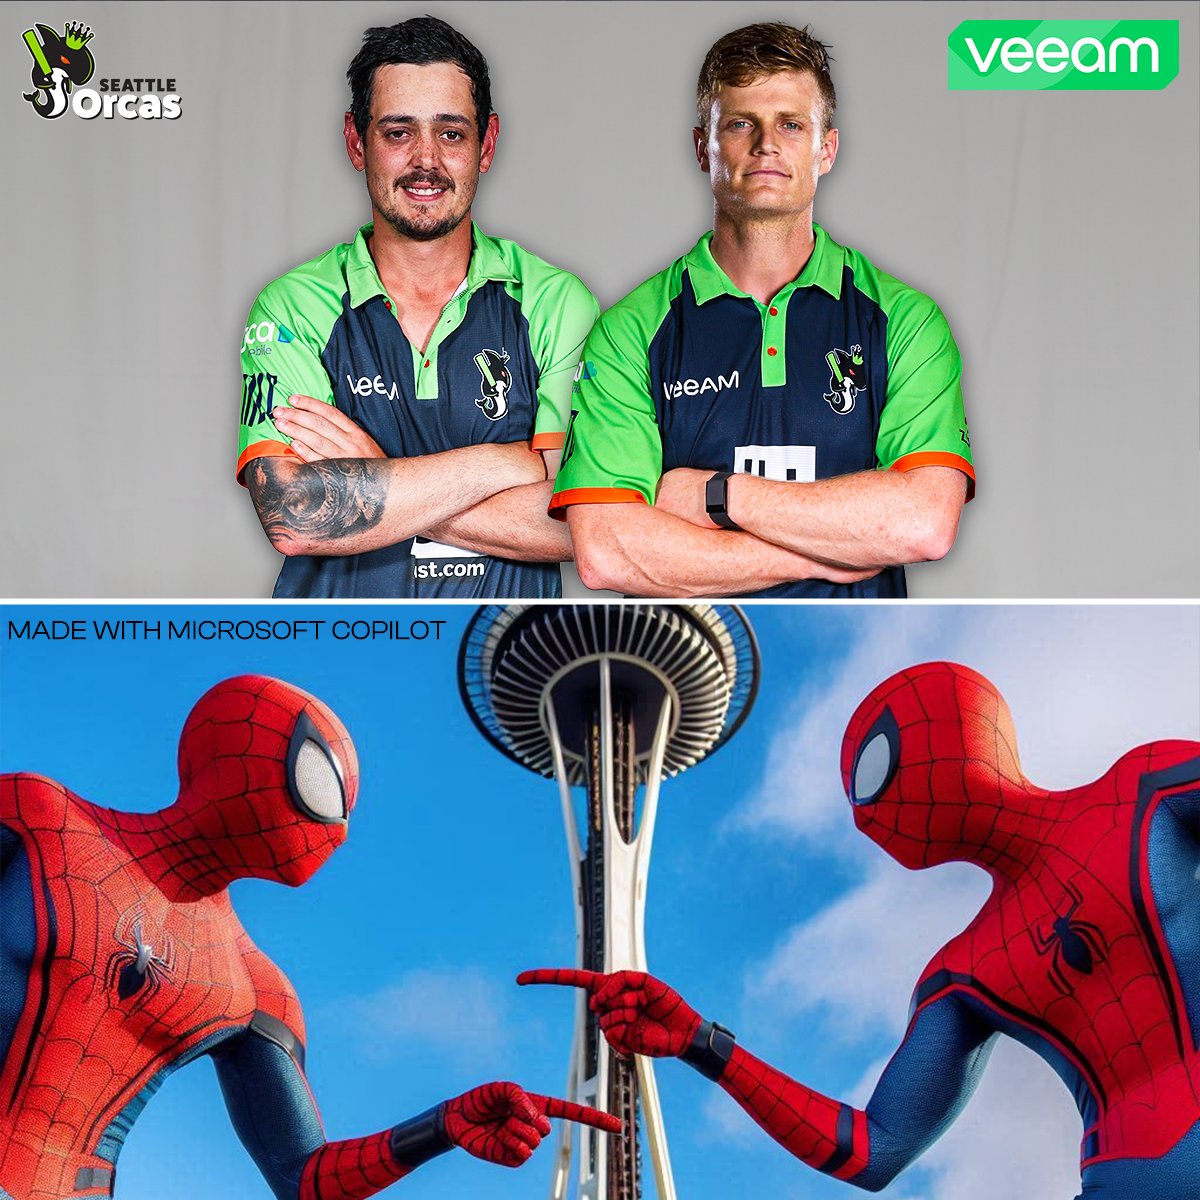 𝙏𝙝𝙚𝙮'𝙧𝙚 𝙩𝙝𝙚 𝙨𝙖𝙢𝙚, 𝙗𝙪𝙩 𝙙𝙞𝙛𝙛𝙚𝙧𝙚𝙣𝙩! 😅

Can't wait to see the two 🇿🇦 Southpaws igniting the #SeattleOrcas batting order in #MLC Season 2!

Created using @MSFTCopilot 🎨  

#MajorLeagueCricket #AFCT #PodSquad | @Veeam